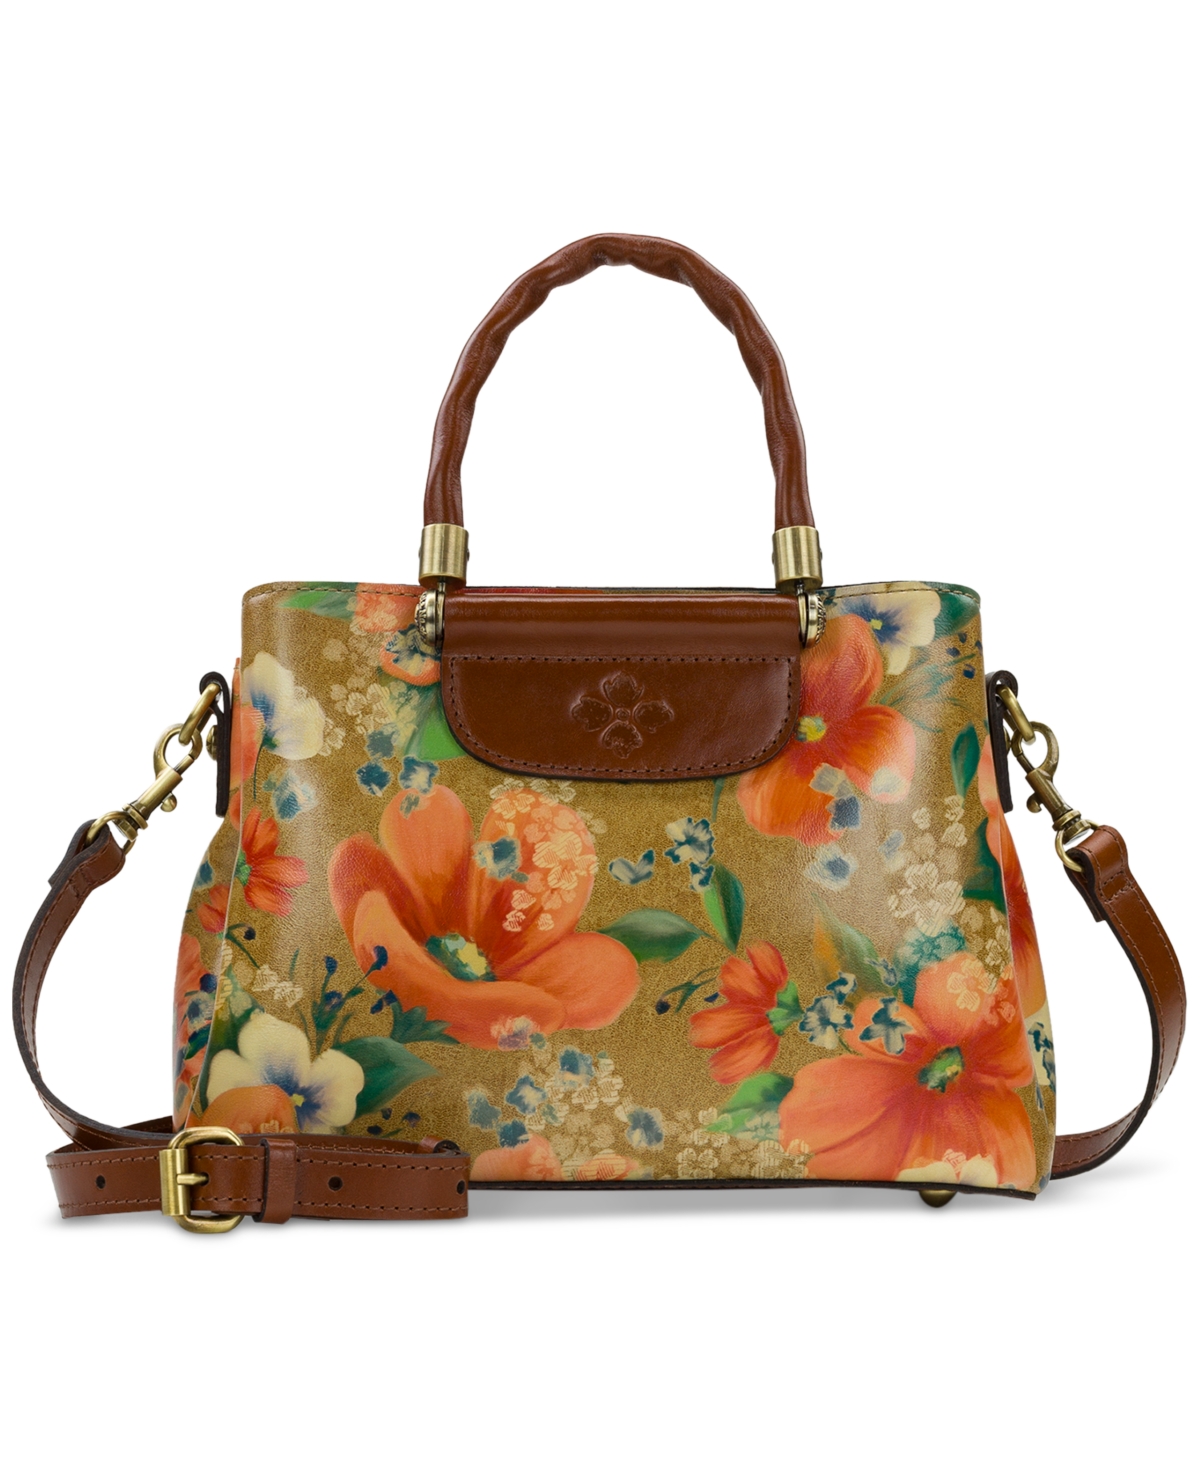 Marielle Small Leather Top Handle Crossbody - Apricot Blossoms